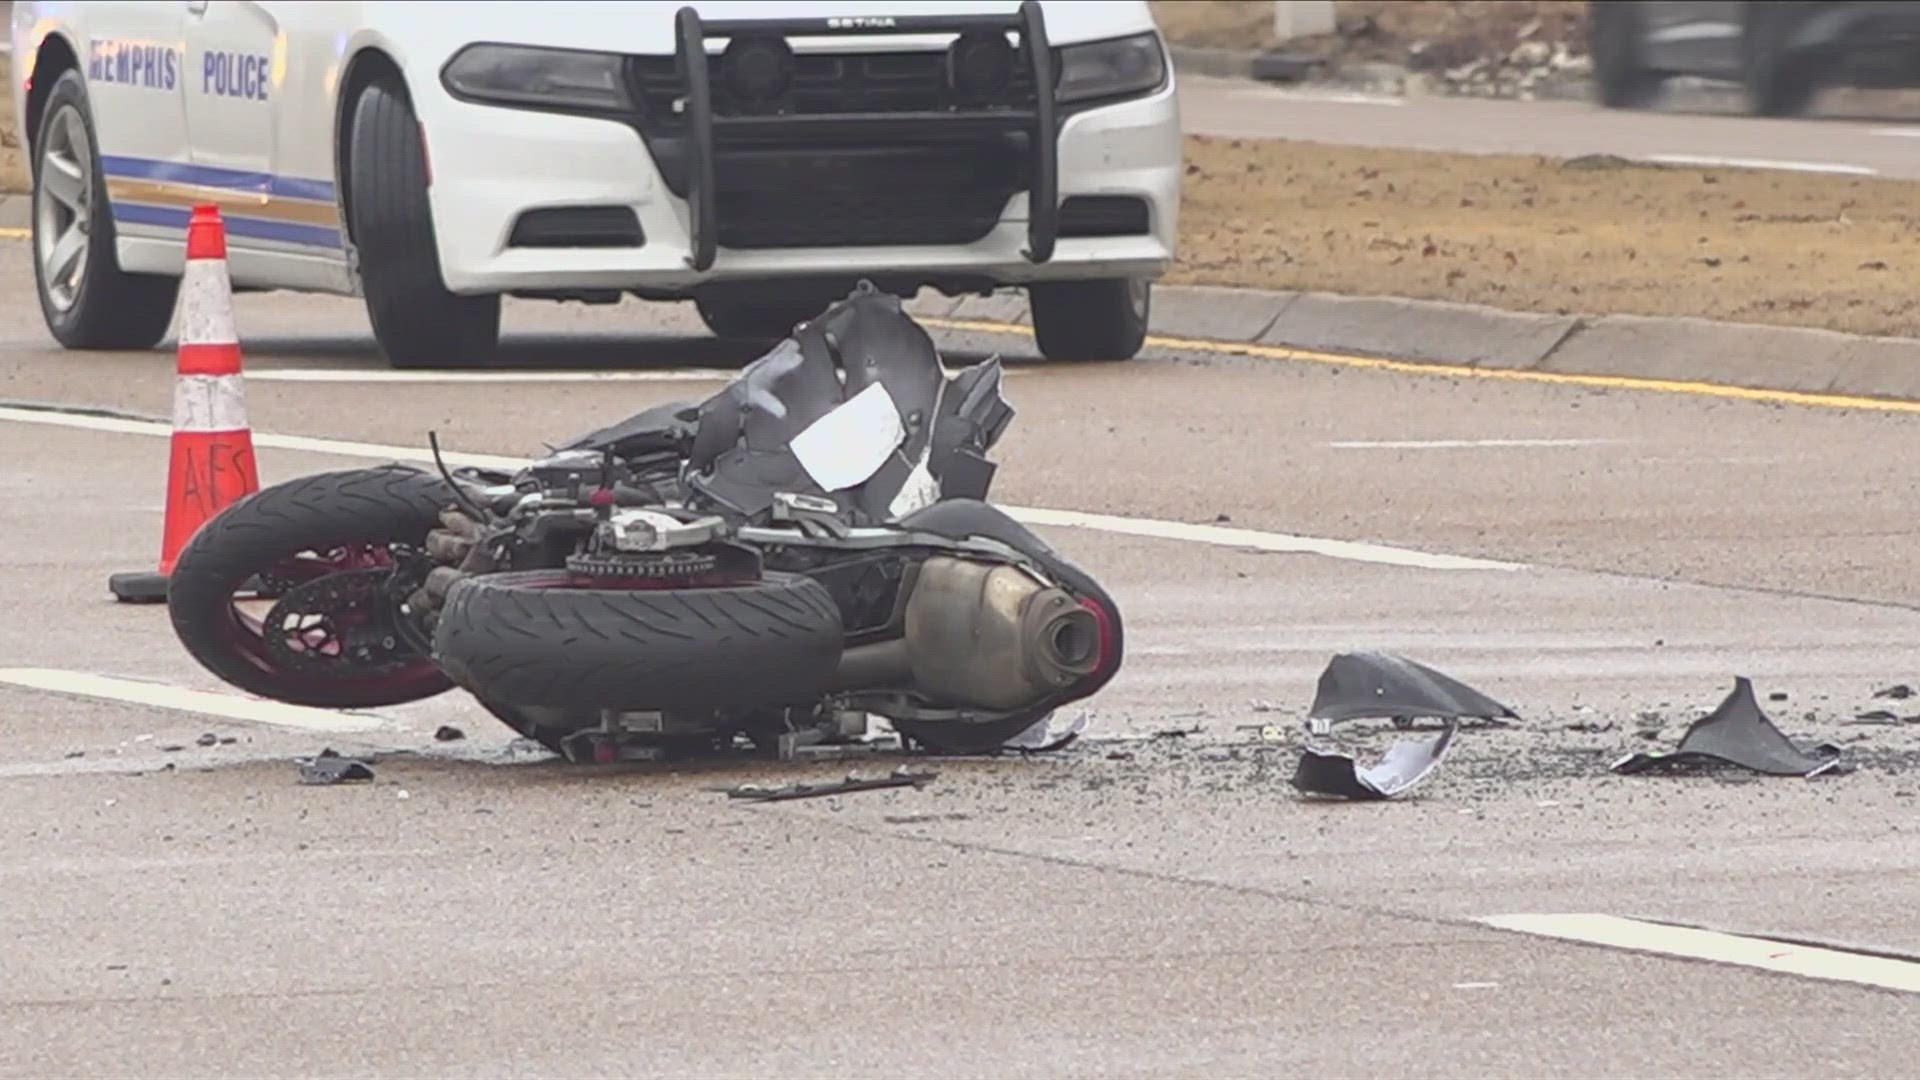 According to the Memphis Police Department (MPD), a man is dead after a motorcycle crash in northeast Memphis on Thursday.